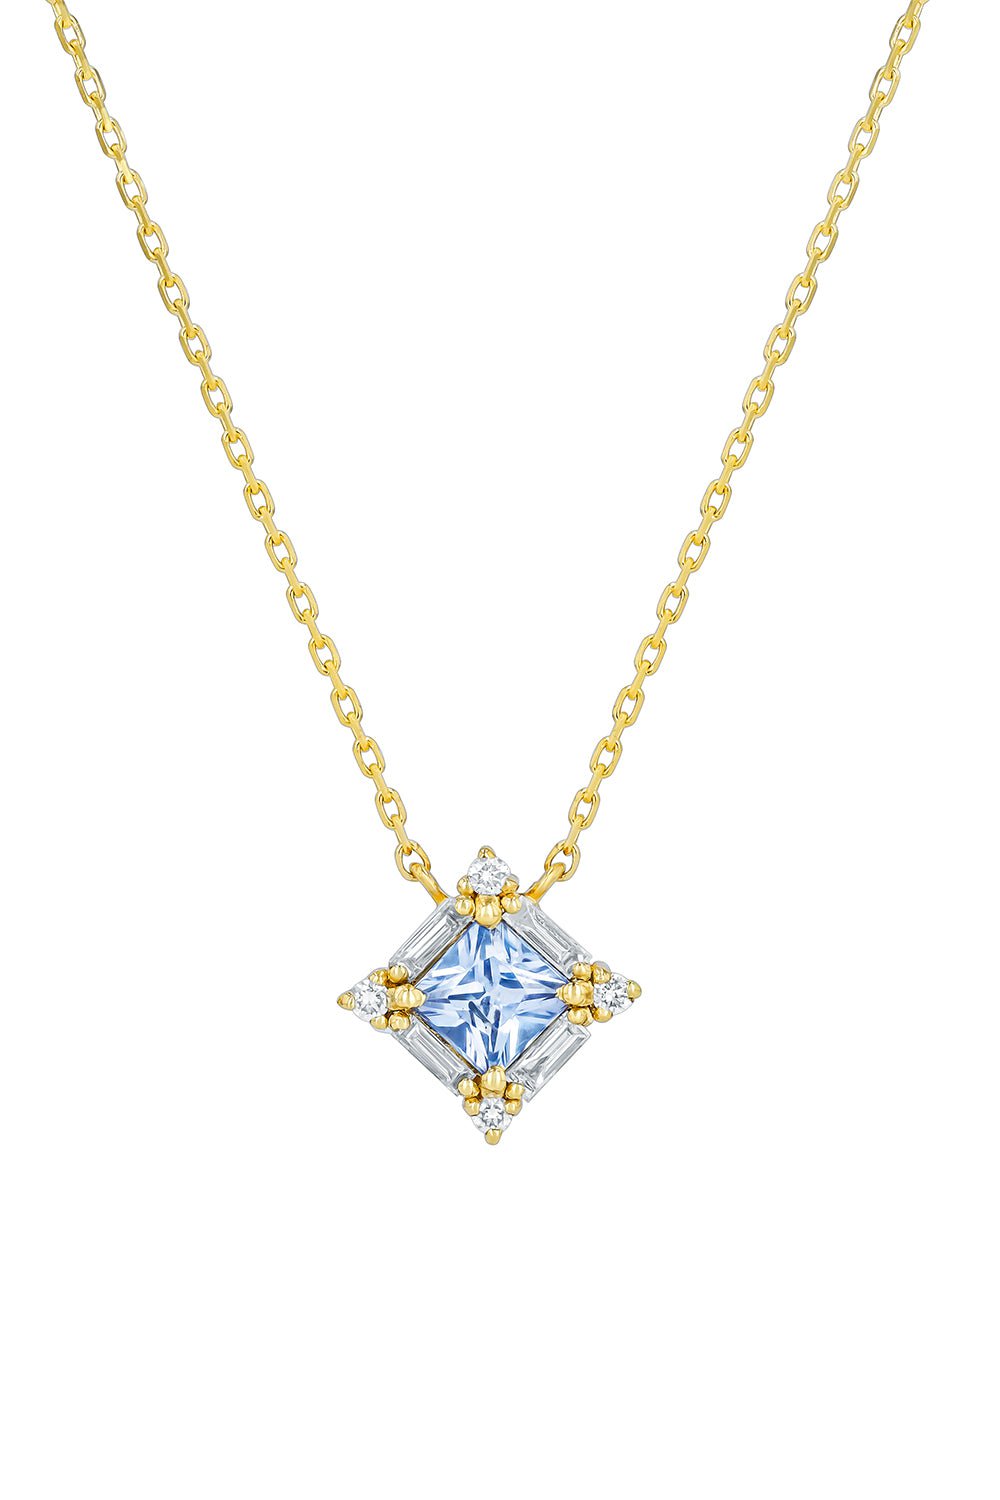 SUZANNE KALAN-Sapphire Necklace-YELLOW GOLD